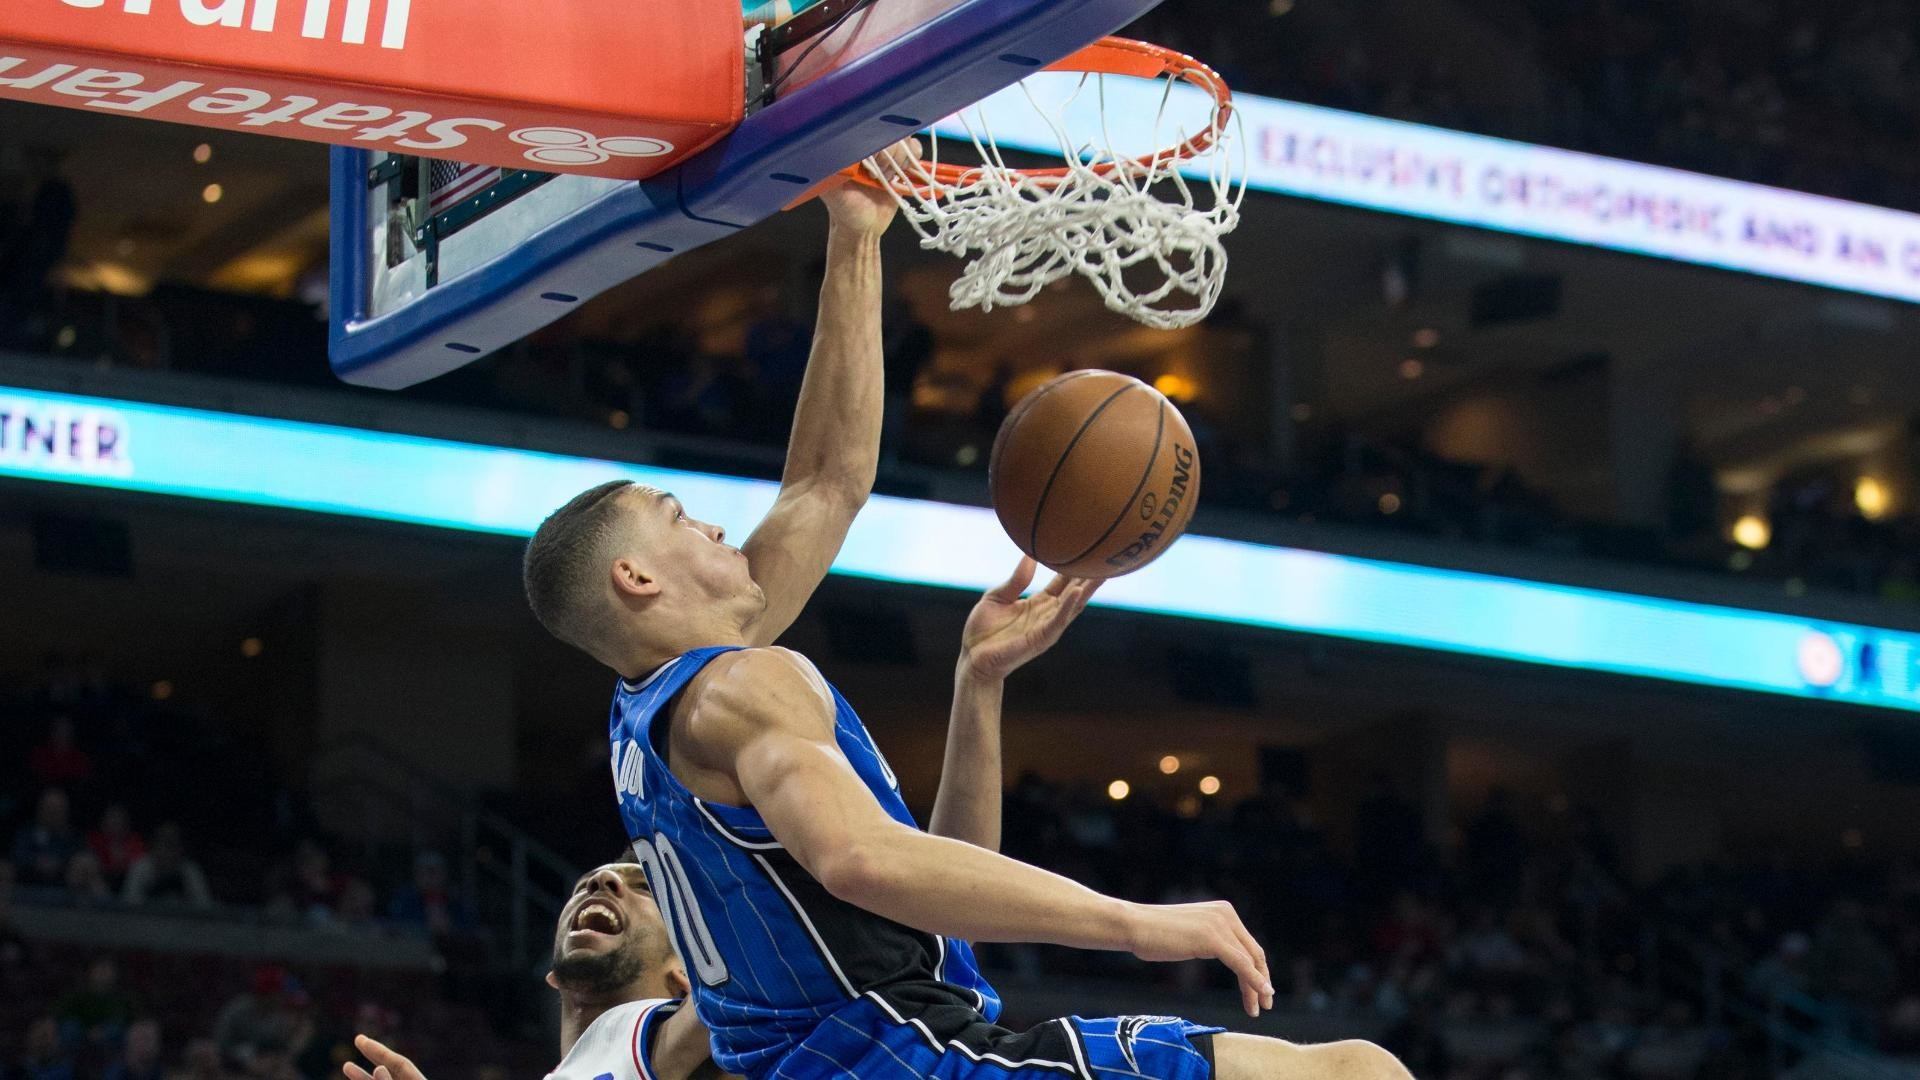 1920x1080 The dunk contest never ends for Aaron Gordon